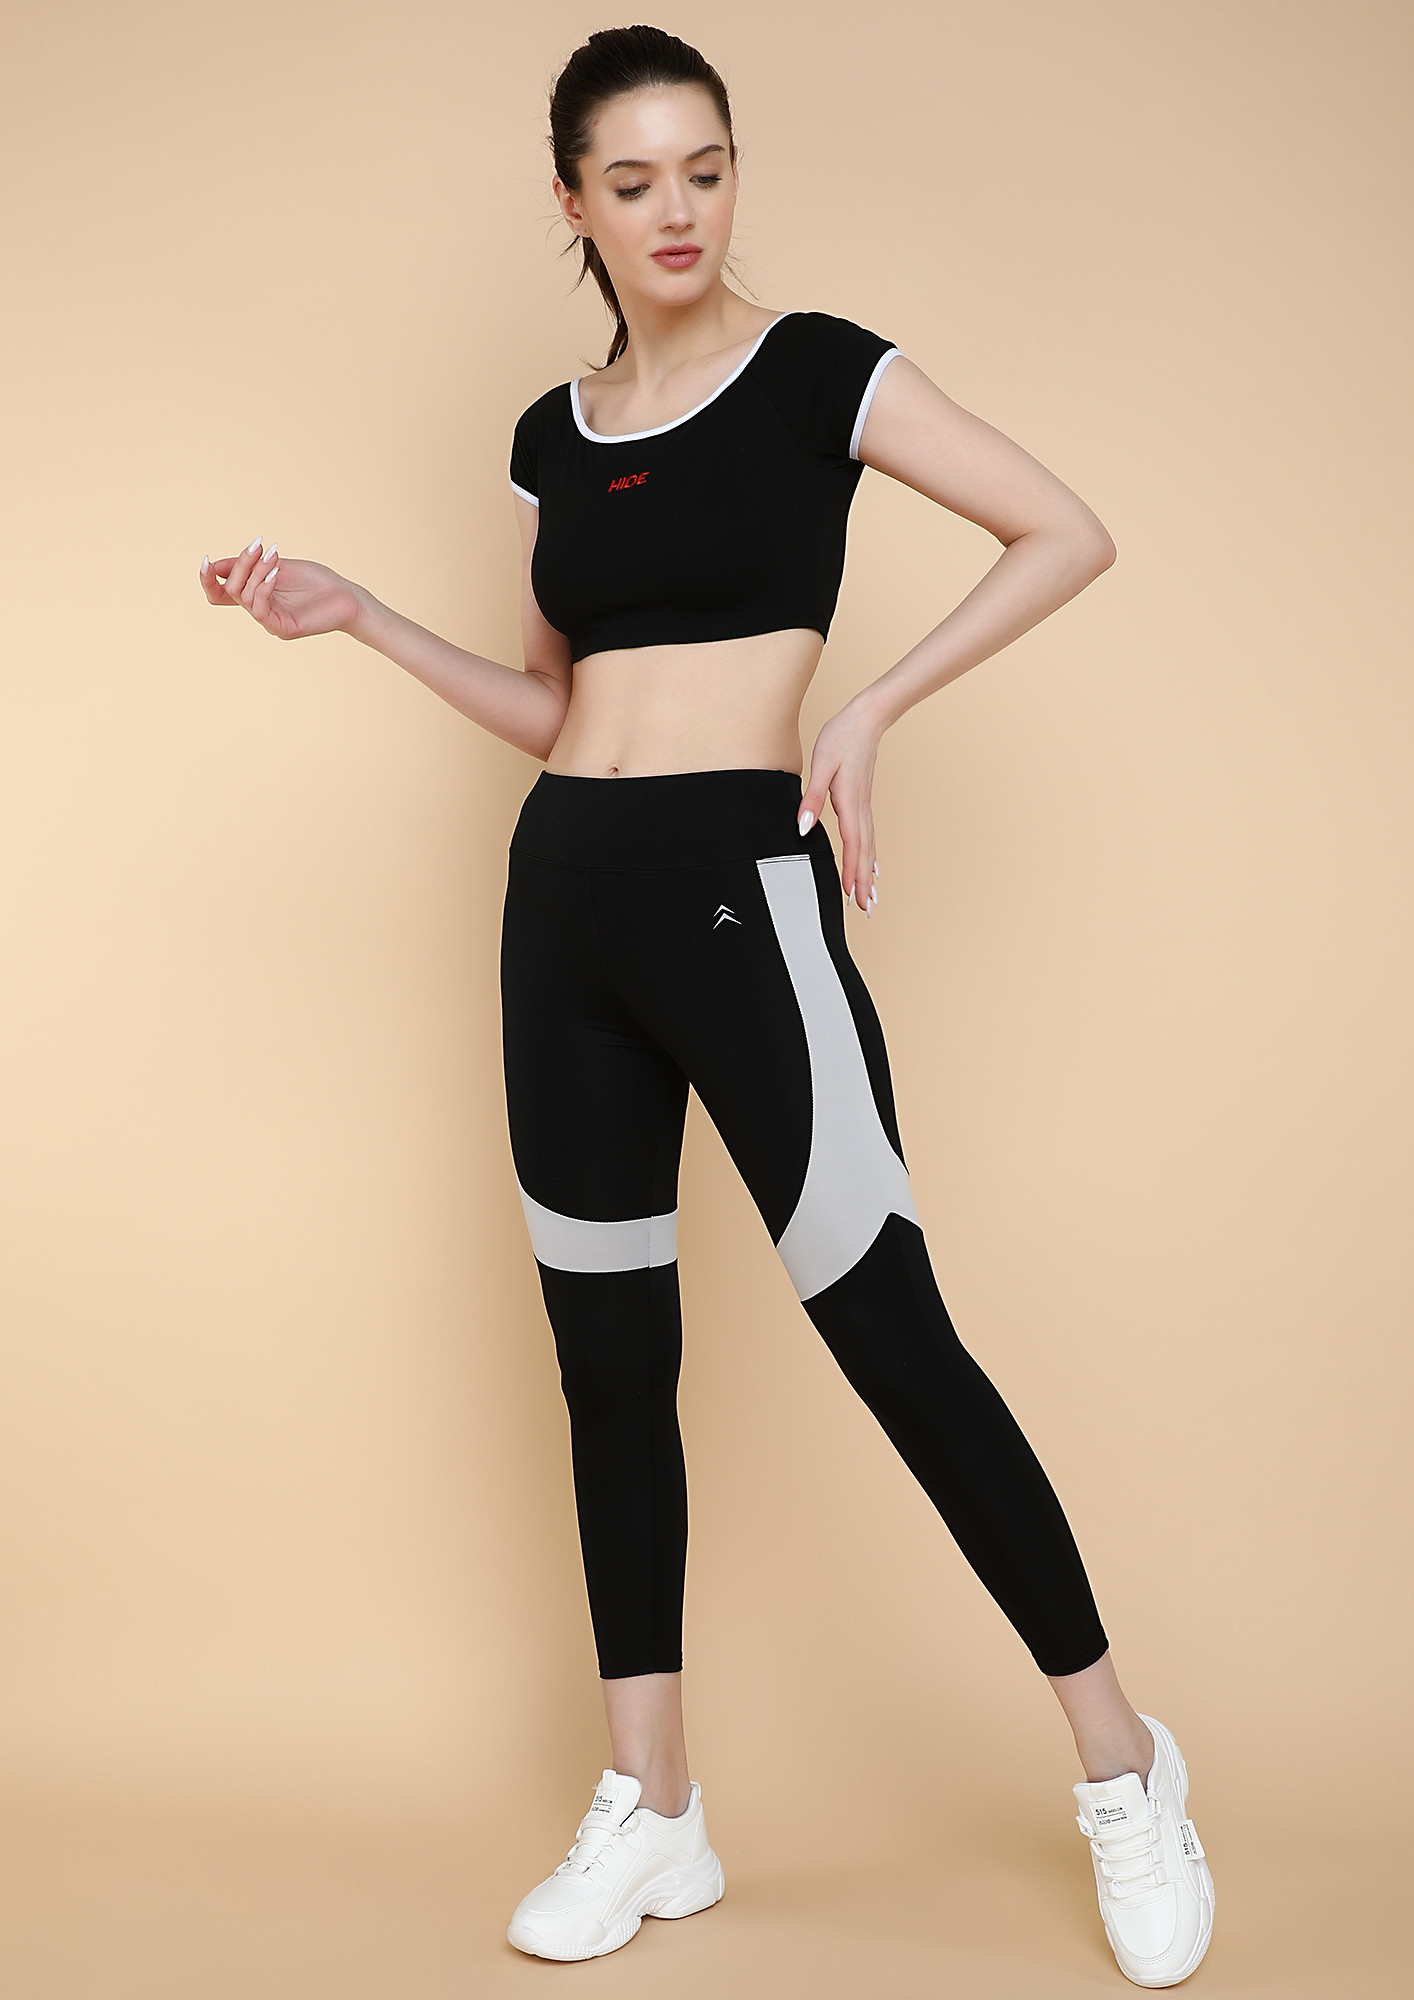 Buy Women's Sports Clothes, Online Gym Apparel